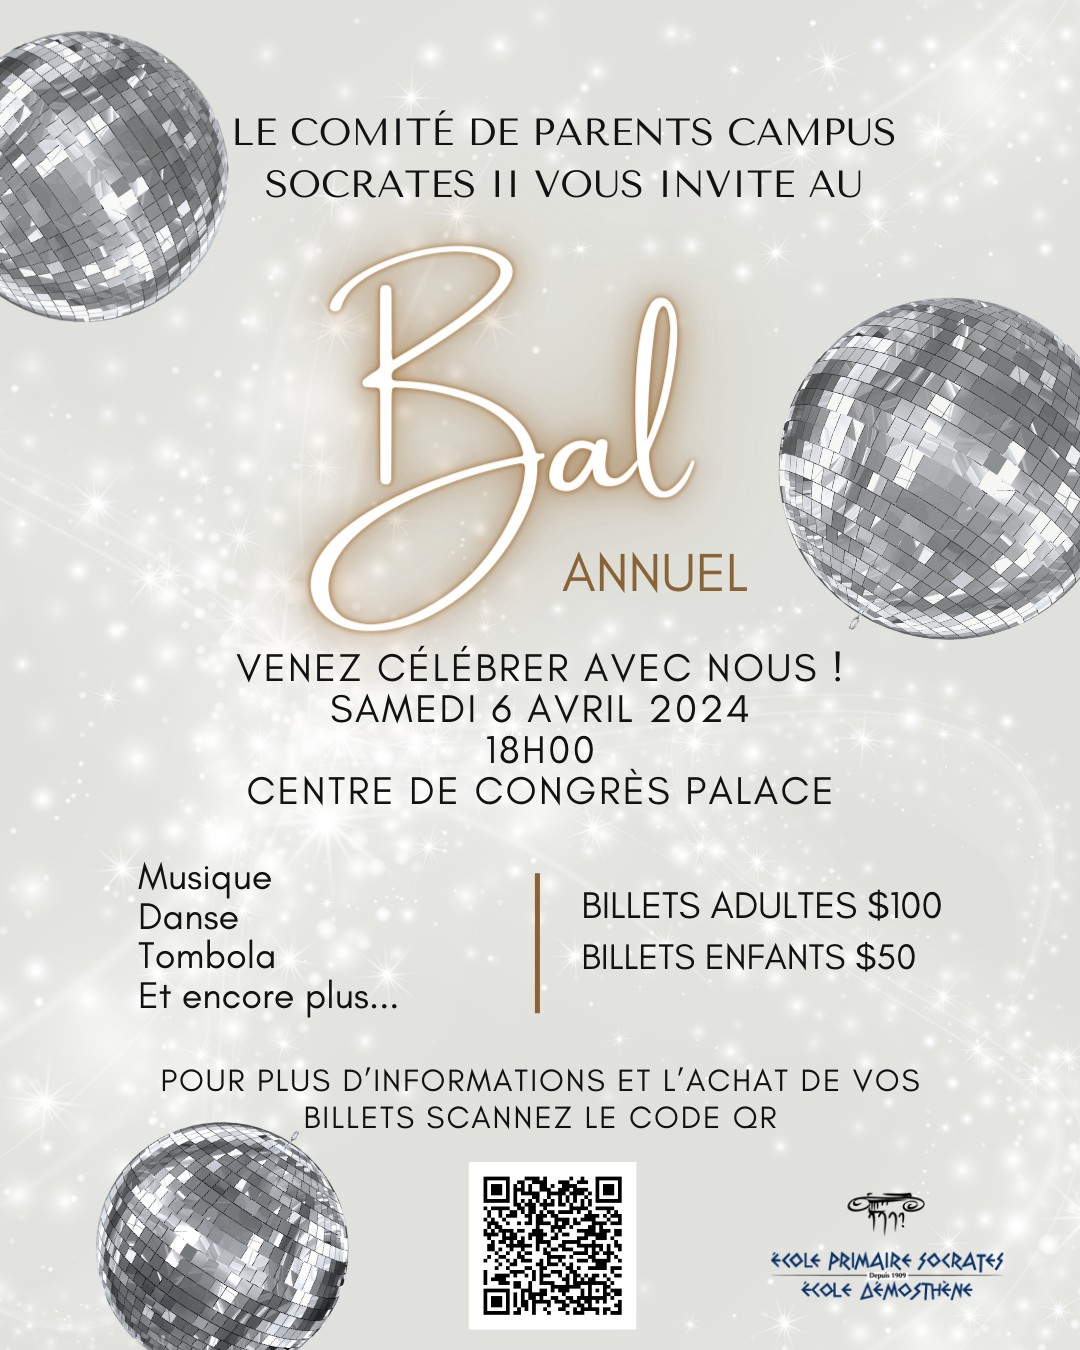 The Socrates II Campus Parents’ Committee invites you to the Annual Ball!